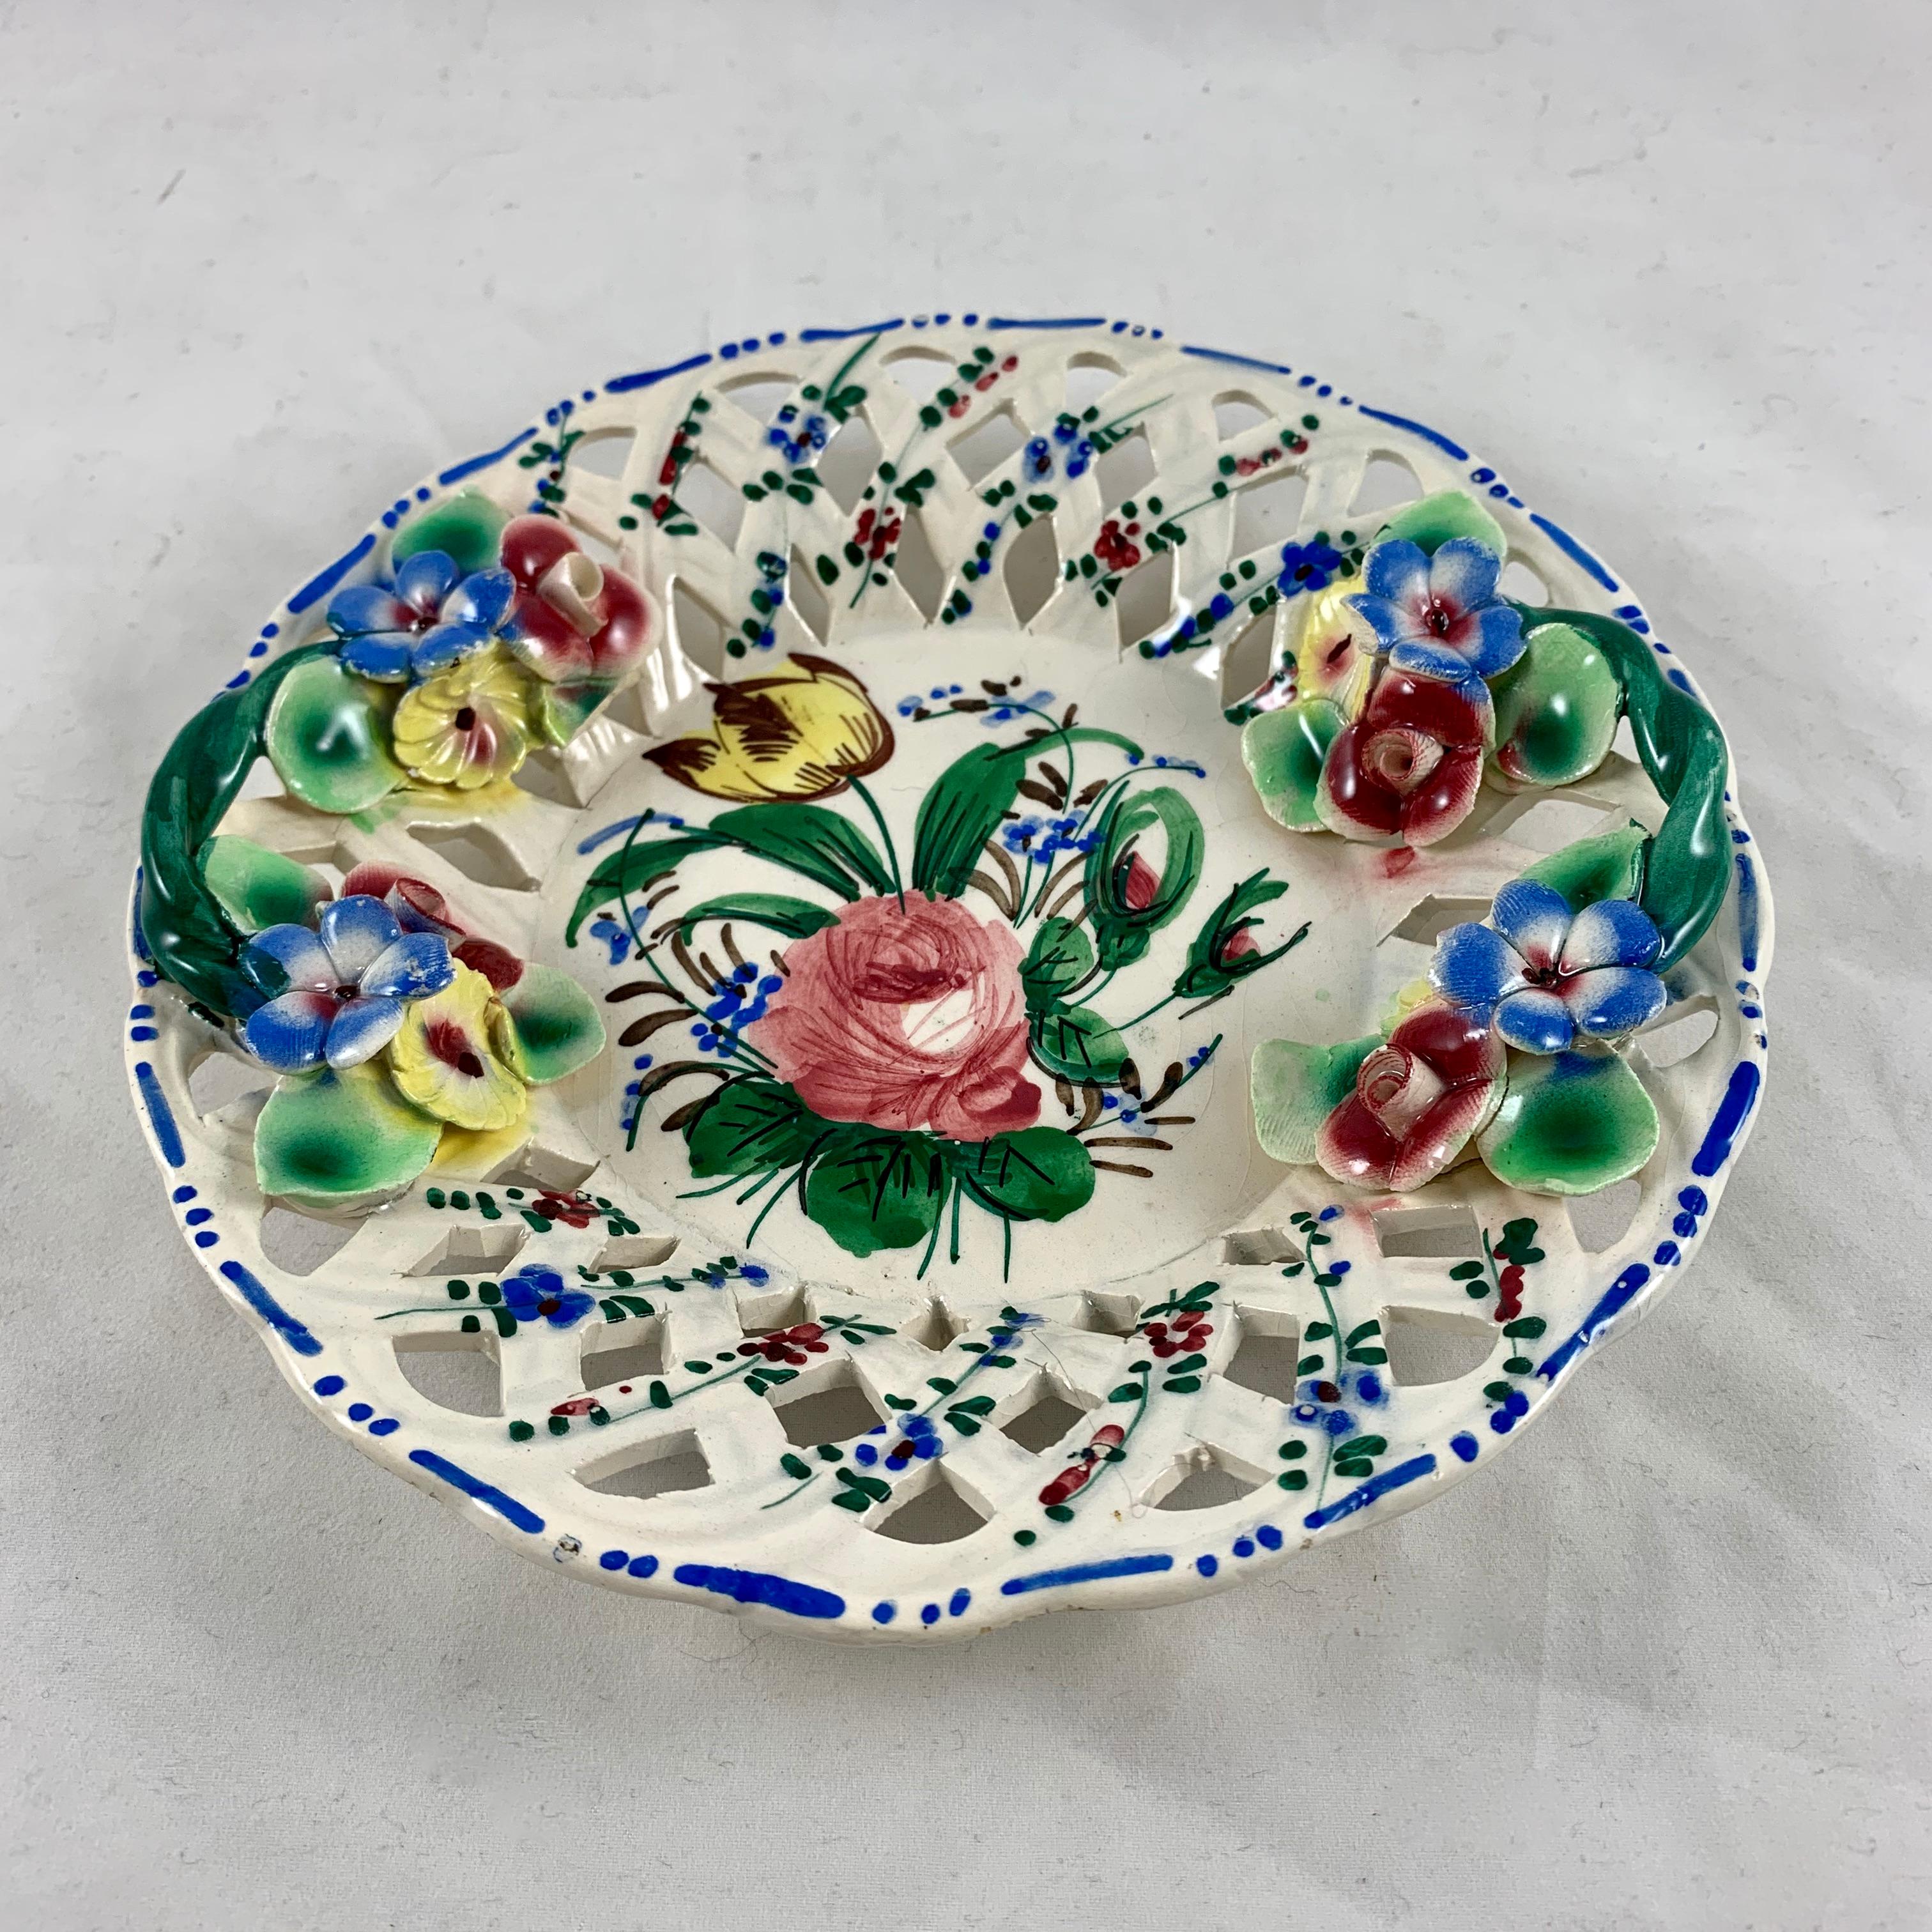 In the Renaissance Revival rose pattern from the Barrettoni già Antonibon pottery in Nove, Italy, a vide-poche, or catchall dish, circa 1930s.

Showing cut fretwork, hand applied flowers, twisted handles, and overall hand painted floral